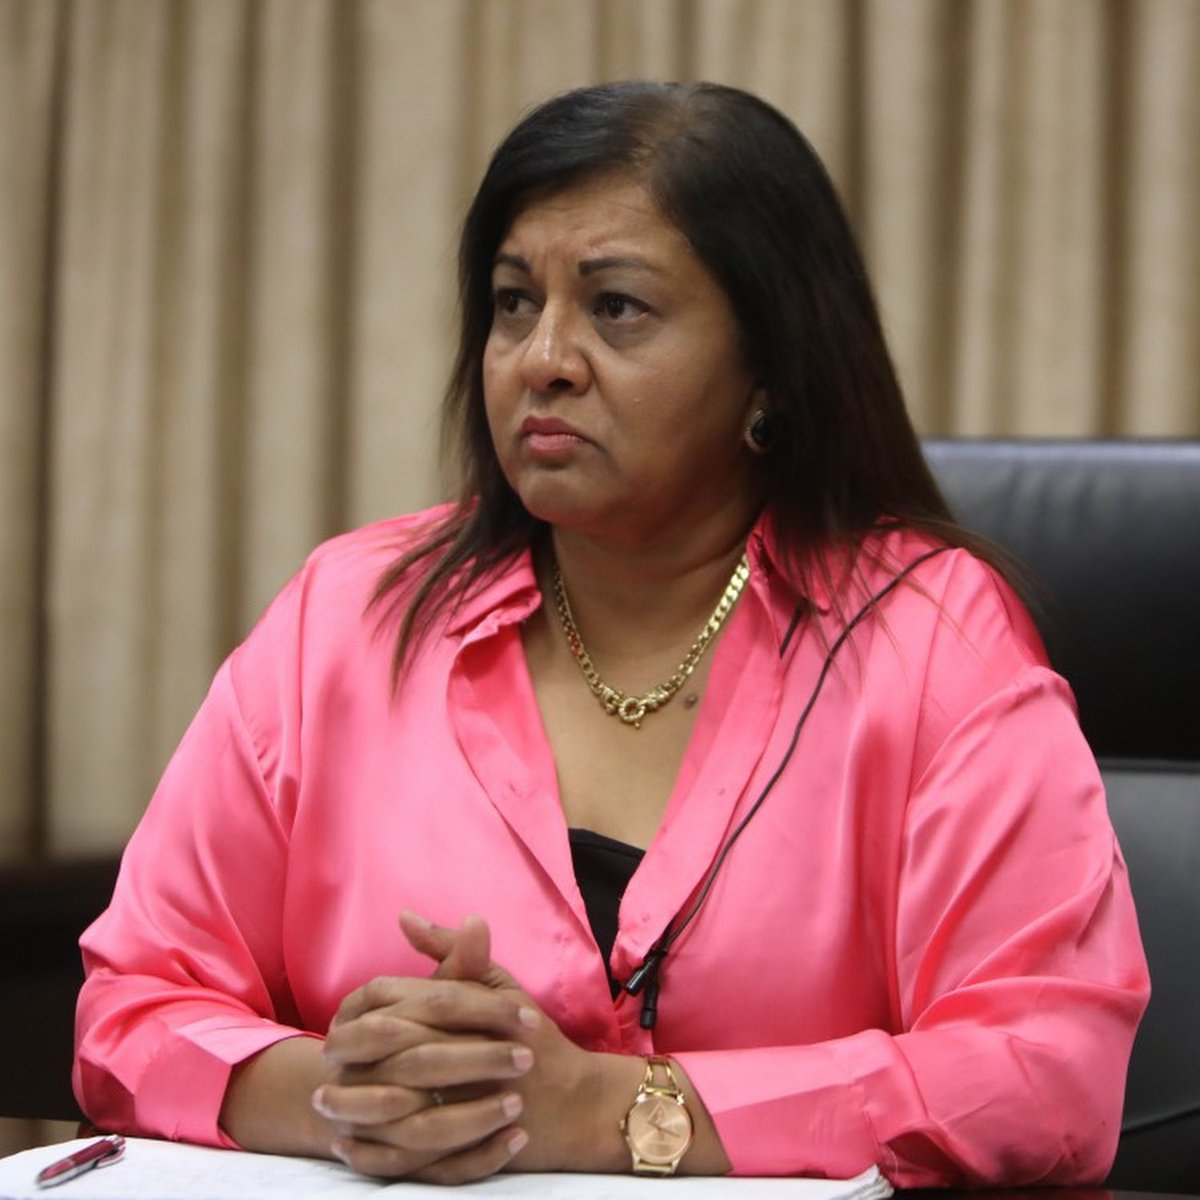 Meet Karen Pillay, responsible for deliberate destruction of Eskom conveyor belts, stations & other hardware so companies linked to her can get contracts to fix the 'damage'. Pillay gave out billions in fake contactor work. How evil! This is TREASON, she deserves 25 years in jail